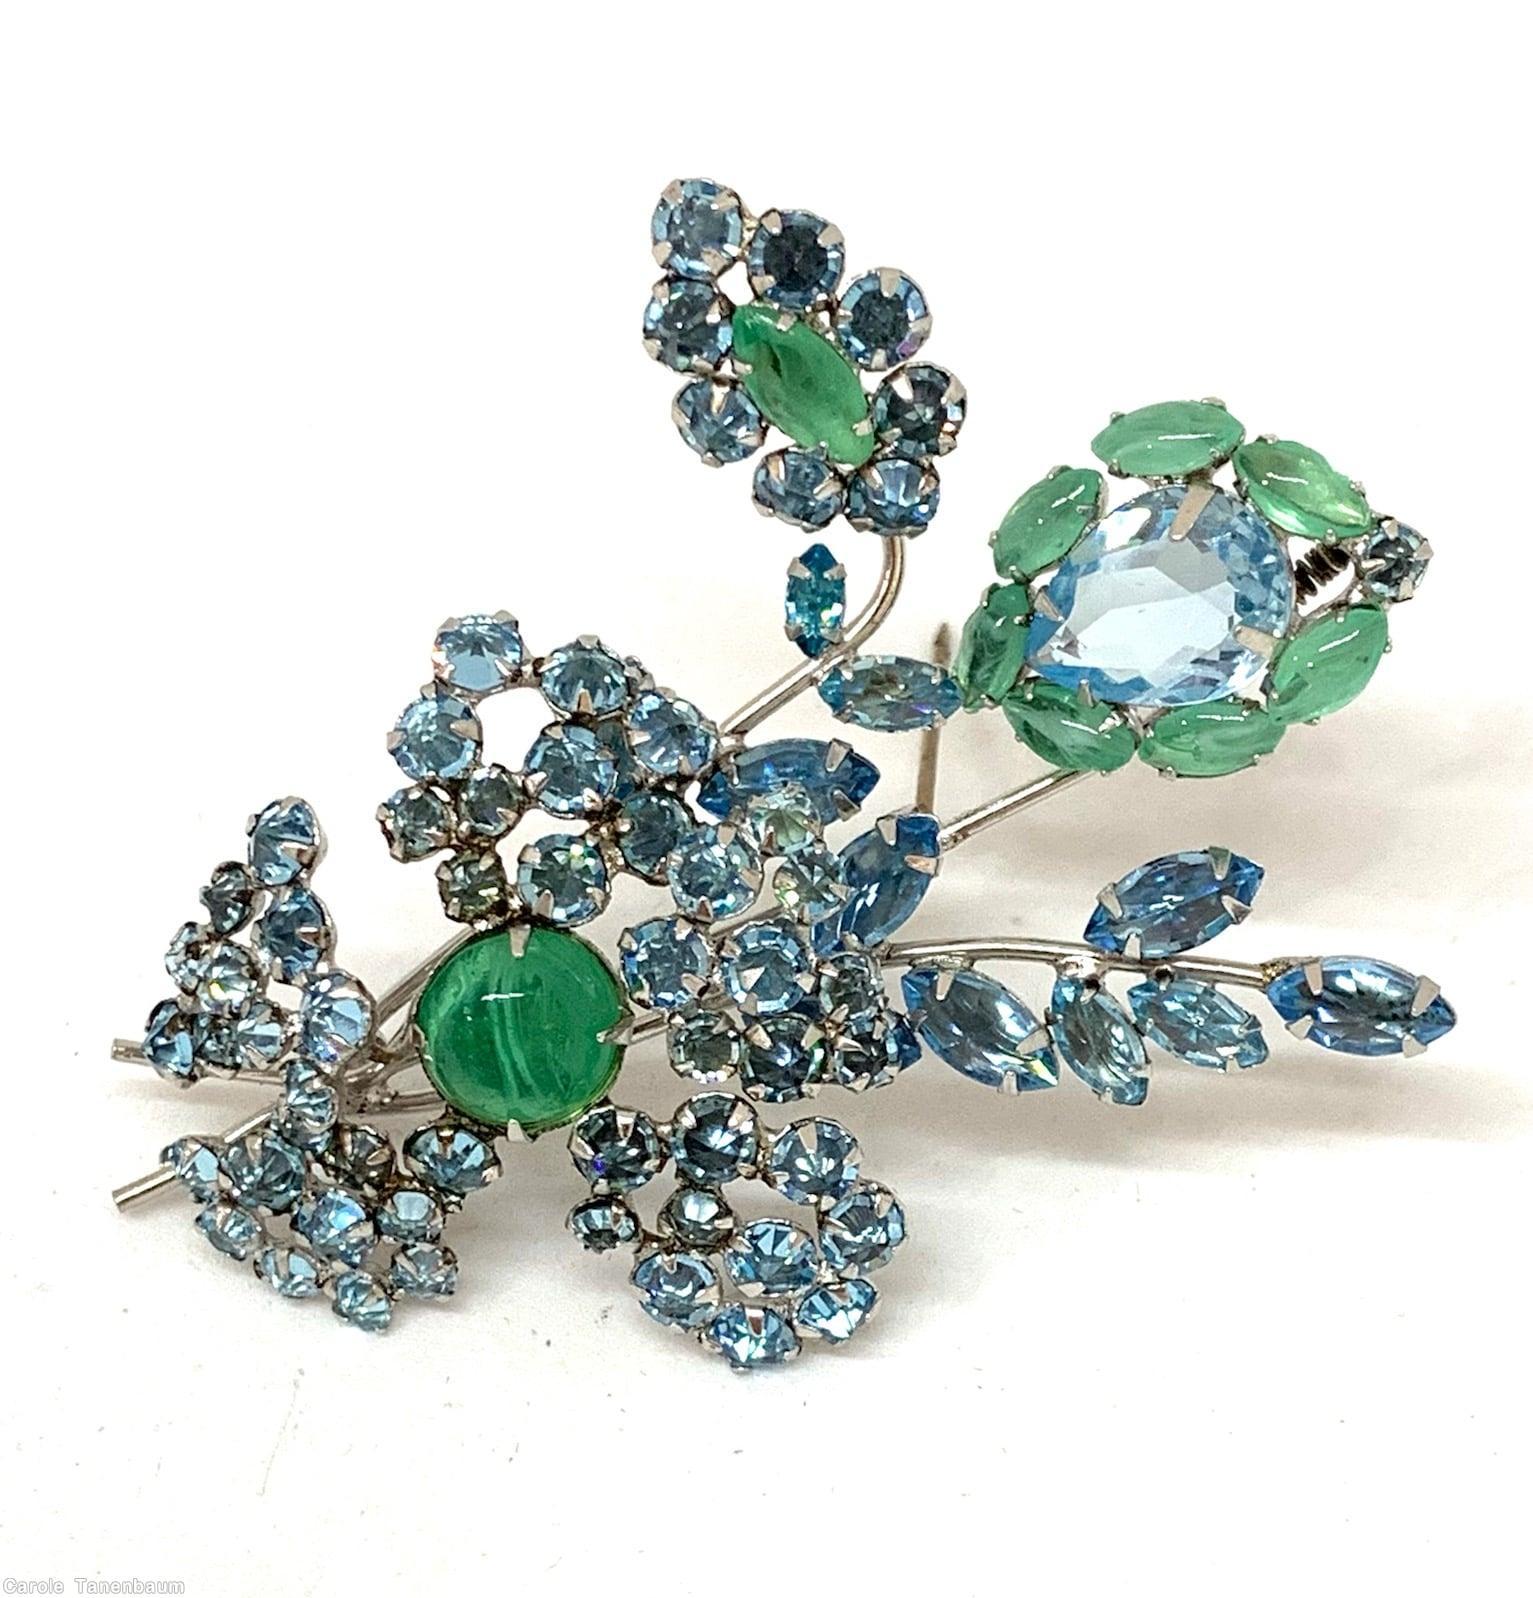 Schreiner 2 trembler flower 3 branch bunch pin 1 large teardrop 2 large oval cab faux emerald ice blue inverted stone silvertone jewelry